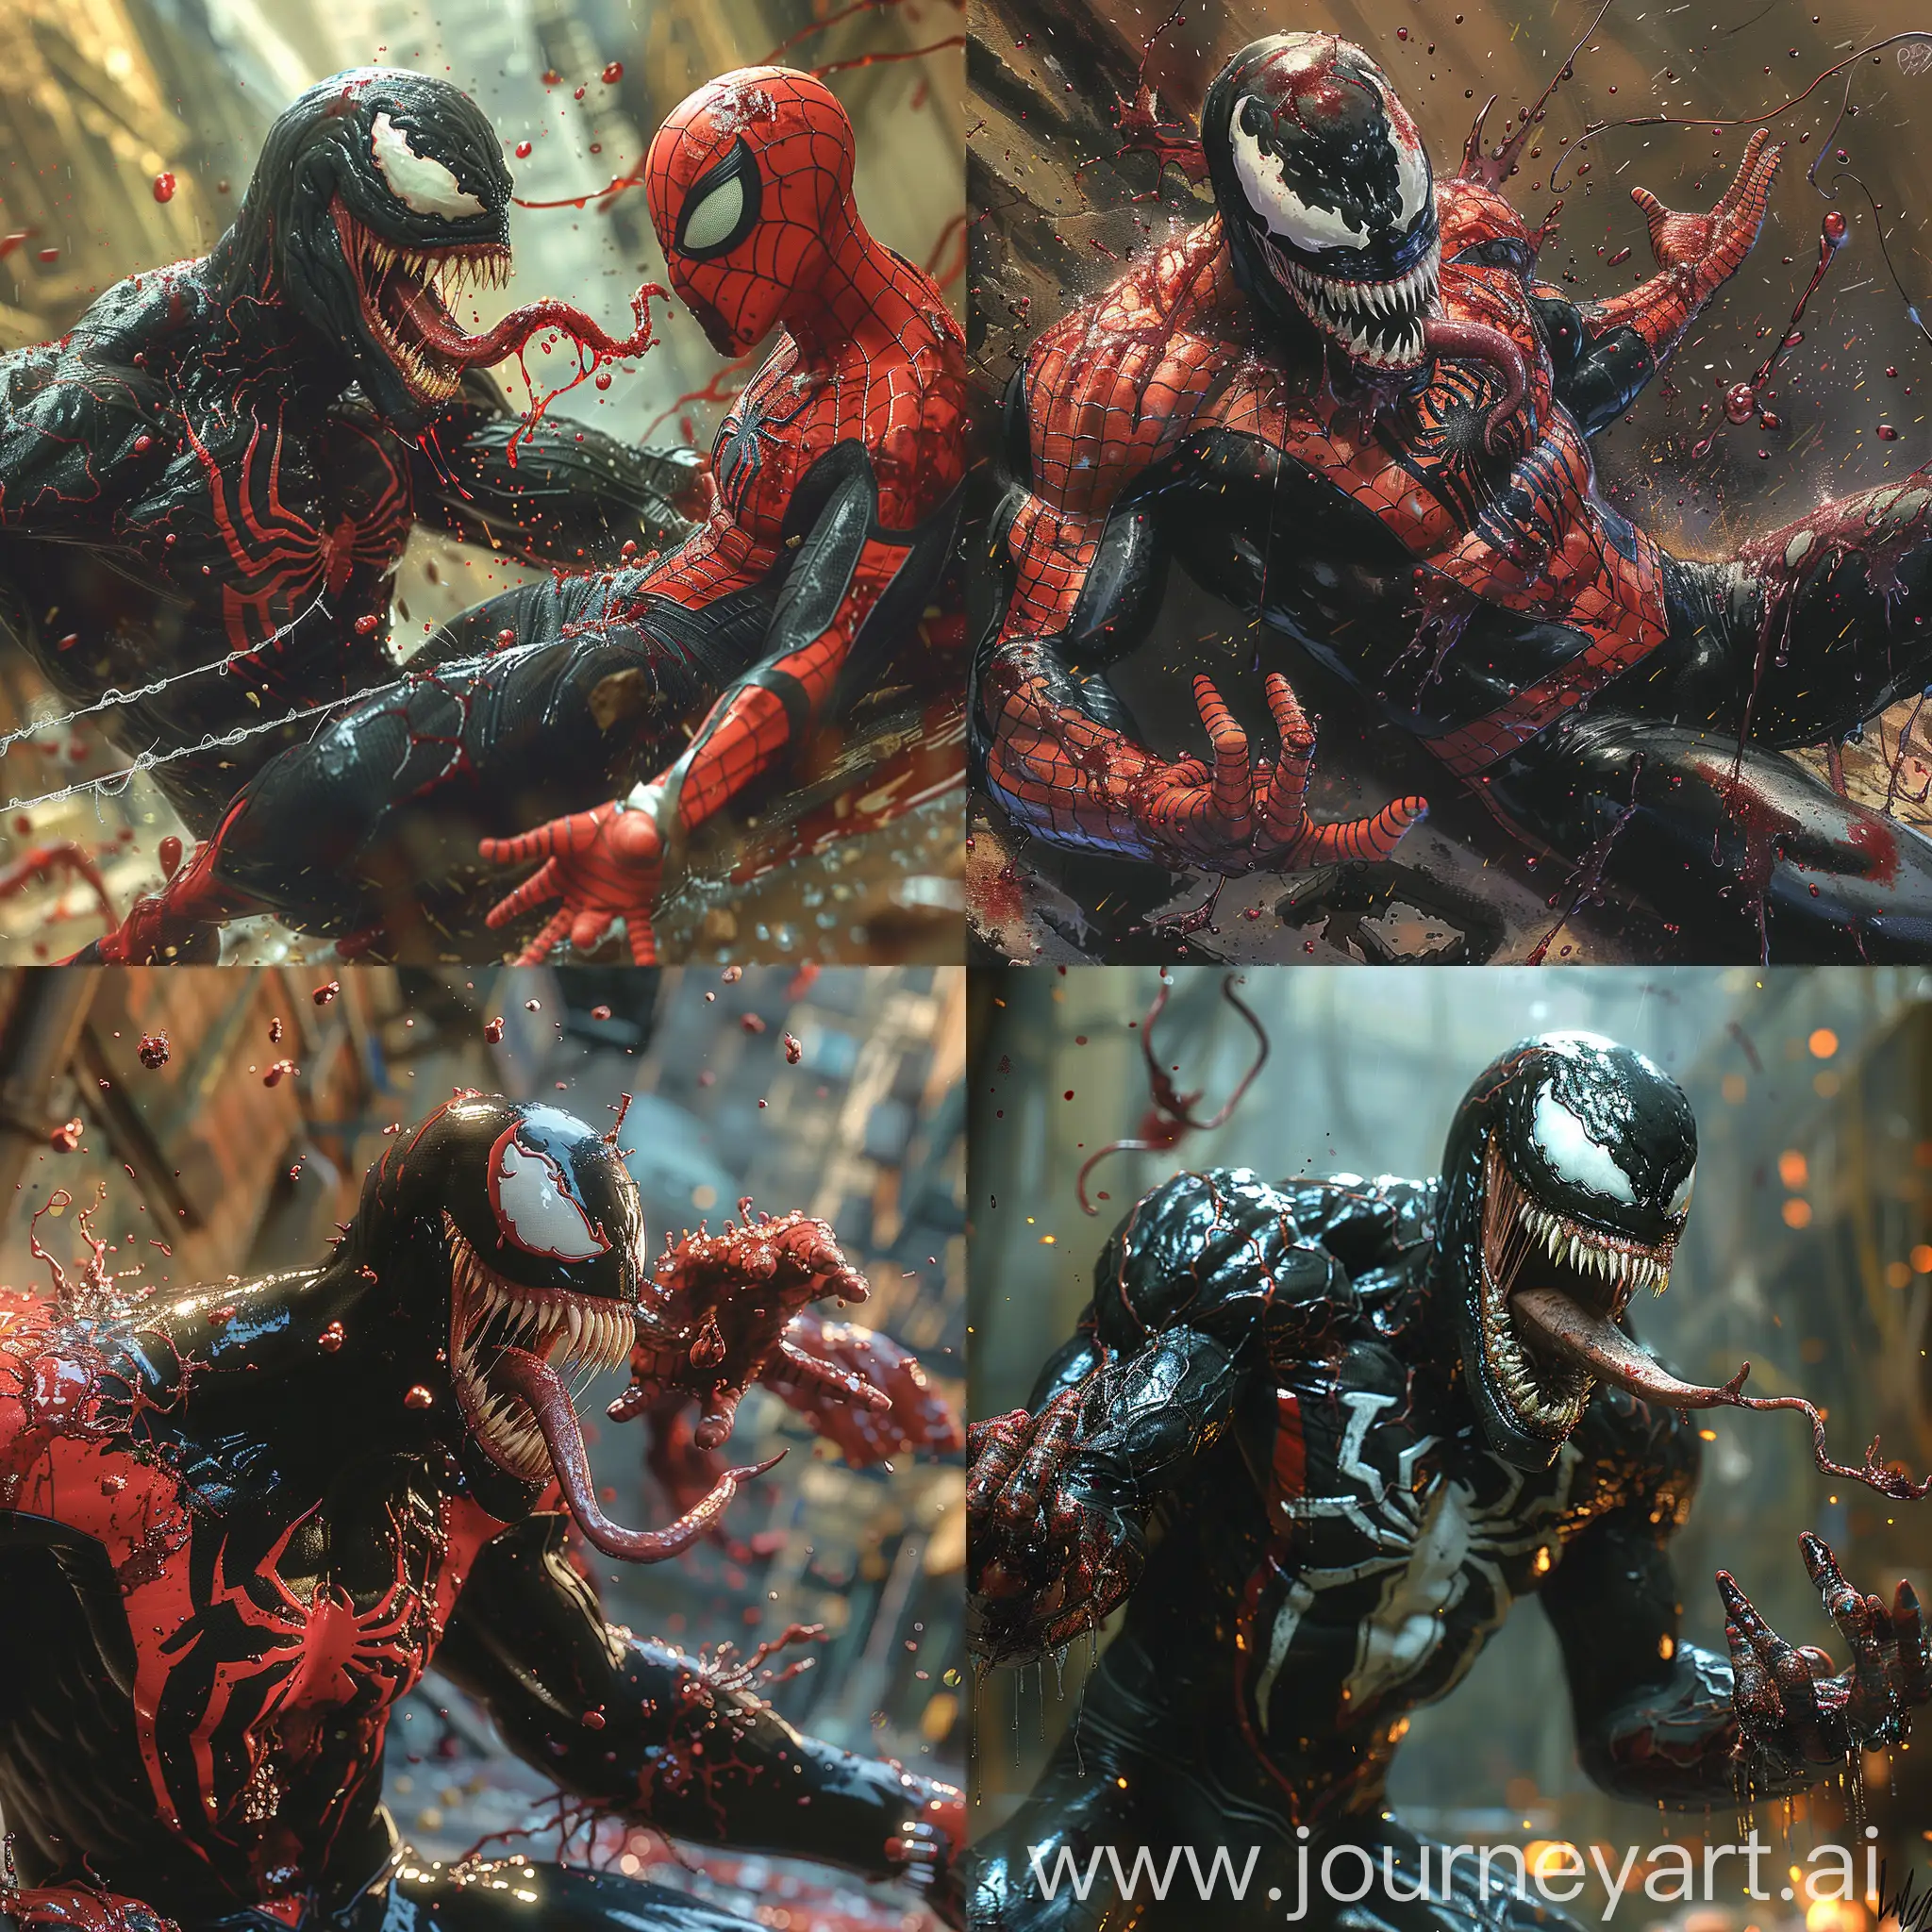  Intense final battle scene, Venom's muscular arms gripping a floating Spider-Man who struggles to escape, venom covered with blood tension palpable, environment drenched in bloody splatters denoting chaos and struggle, sinister and dramatic atmosphere --ar 1:1 --s 700 --c 15 --v 6